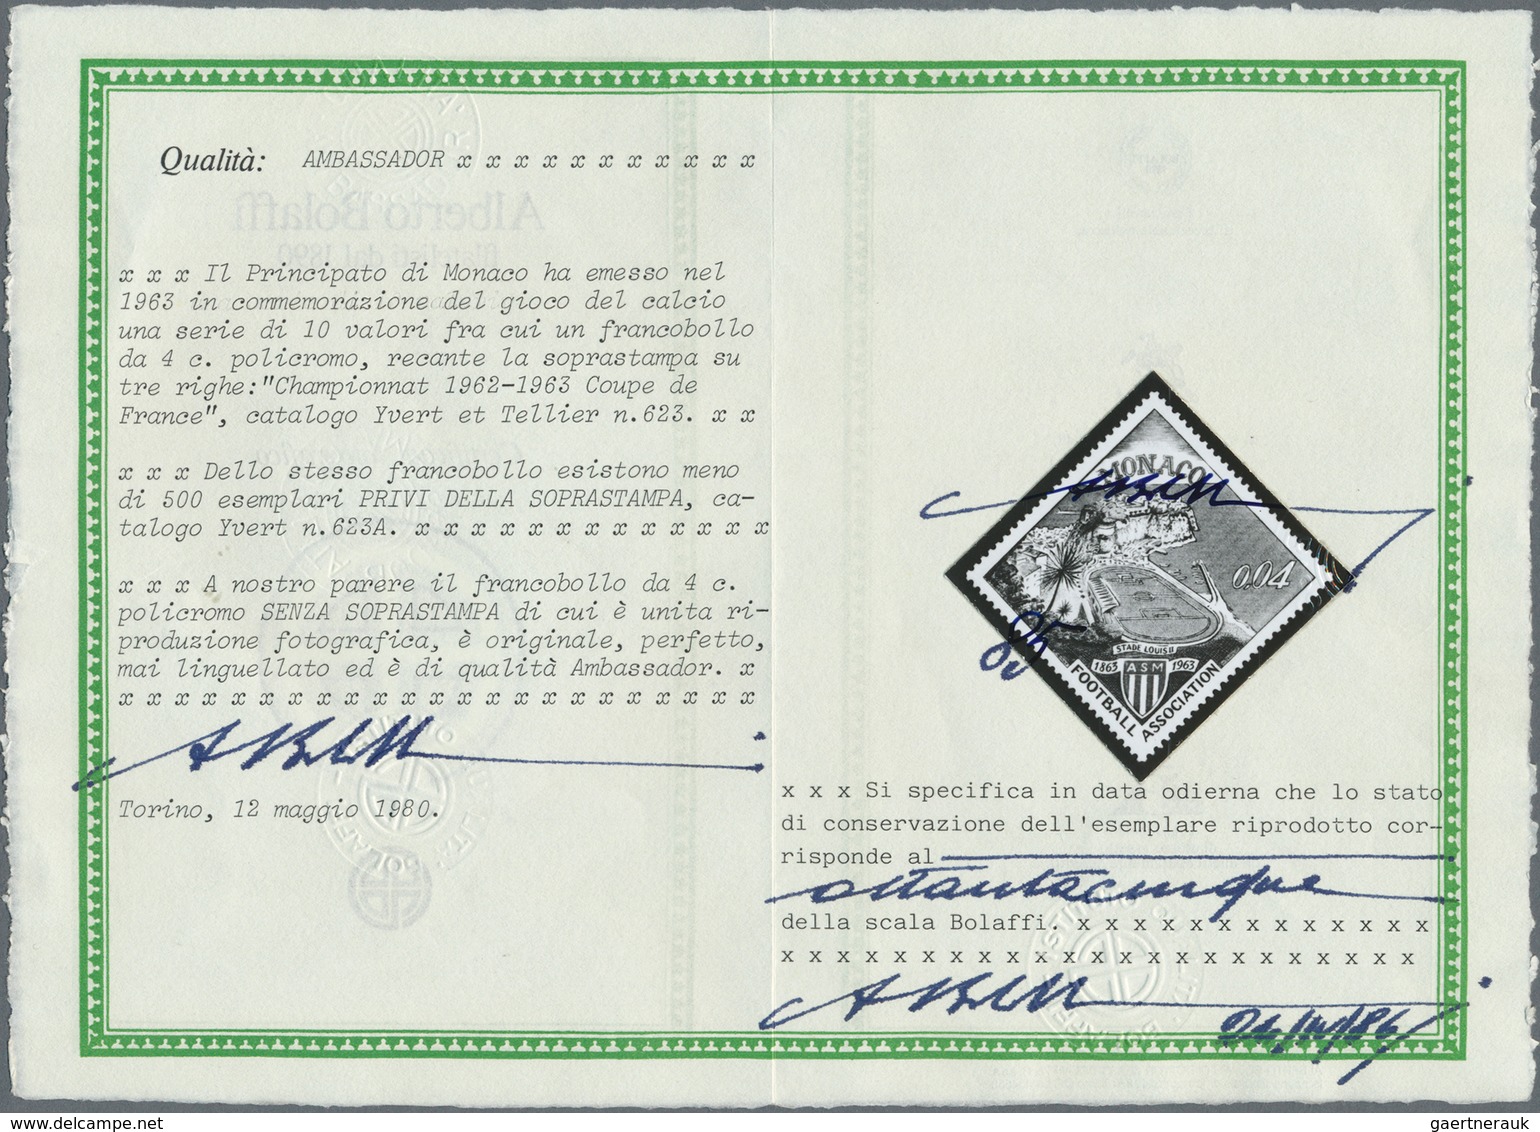 01547 Monaco: 1963, French Champion "AS Monaco", 0.04fr. Without Surcharge, Not Issued, Unmounted Mint, Ce - Ungebraucht